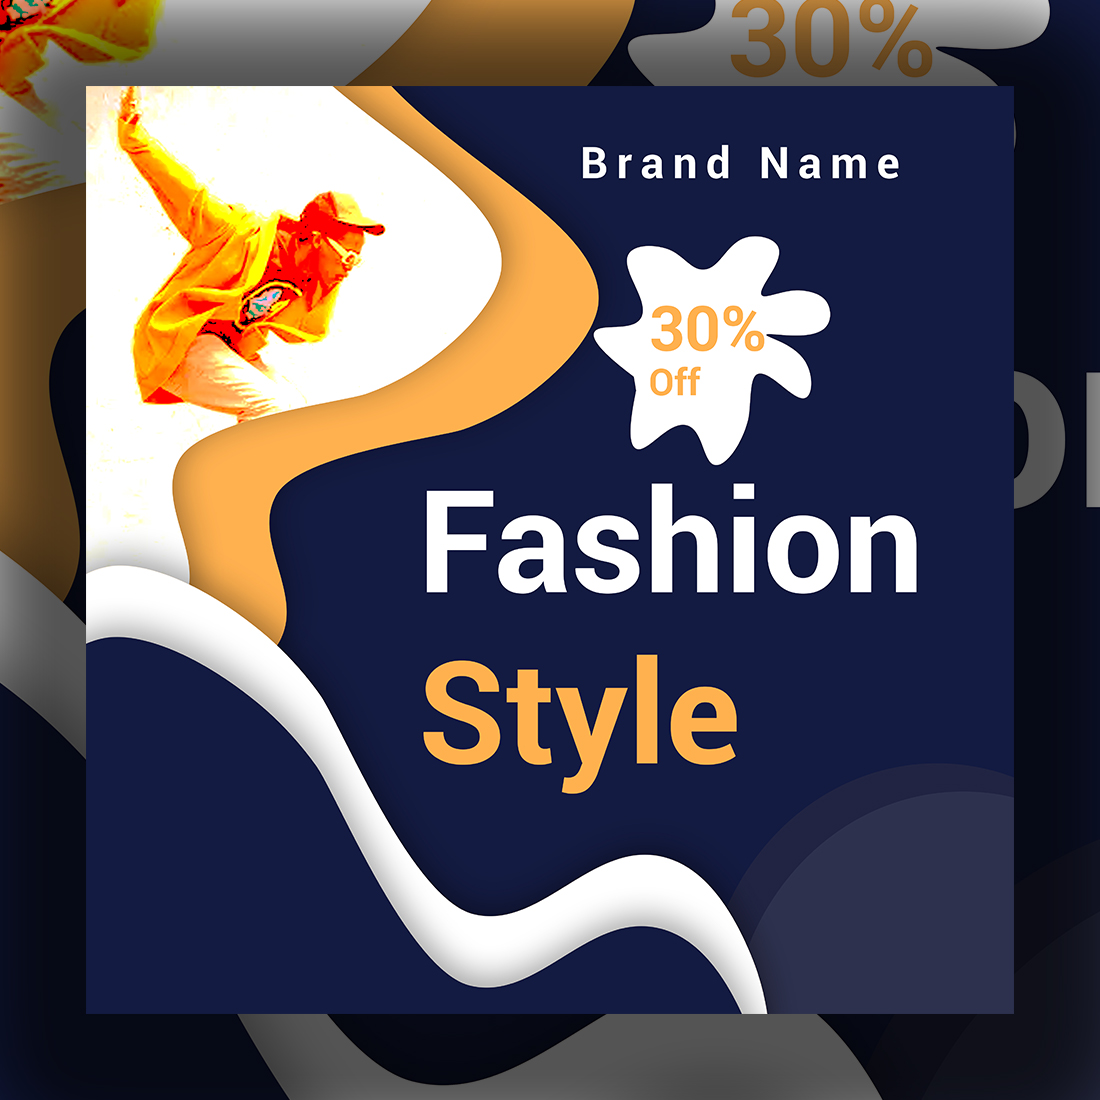 Fashio style poster design ( Best for fashion promotion ) preview image.